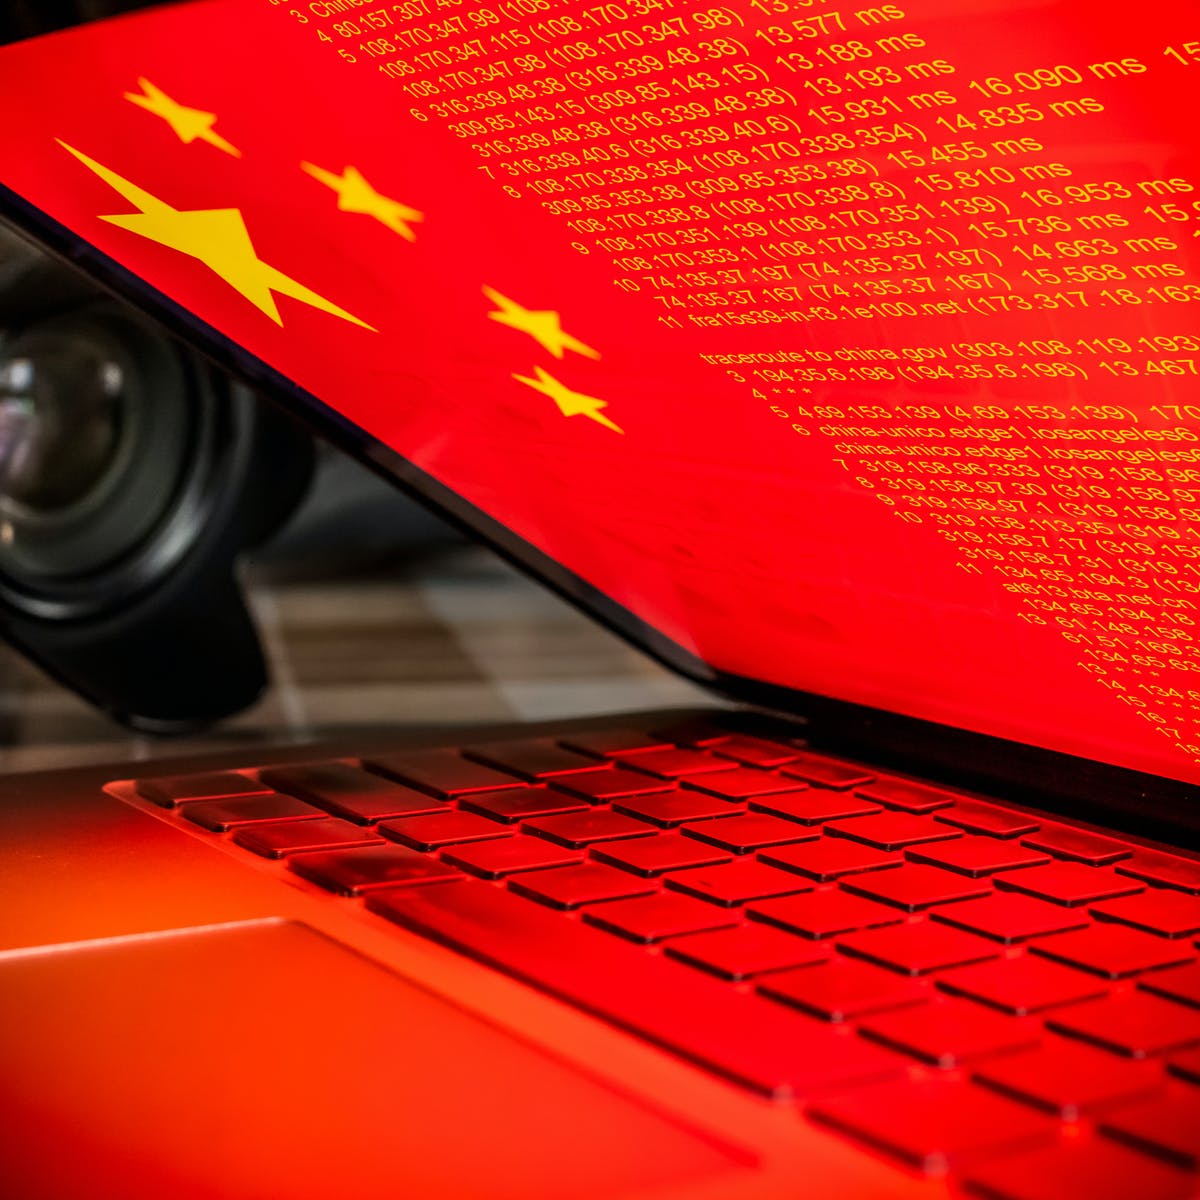 Microsoft fixes zero day vulnerability exploited by Chinese spies